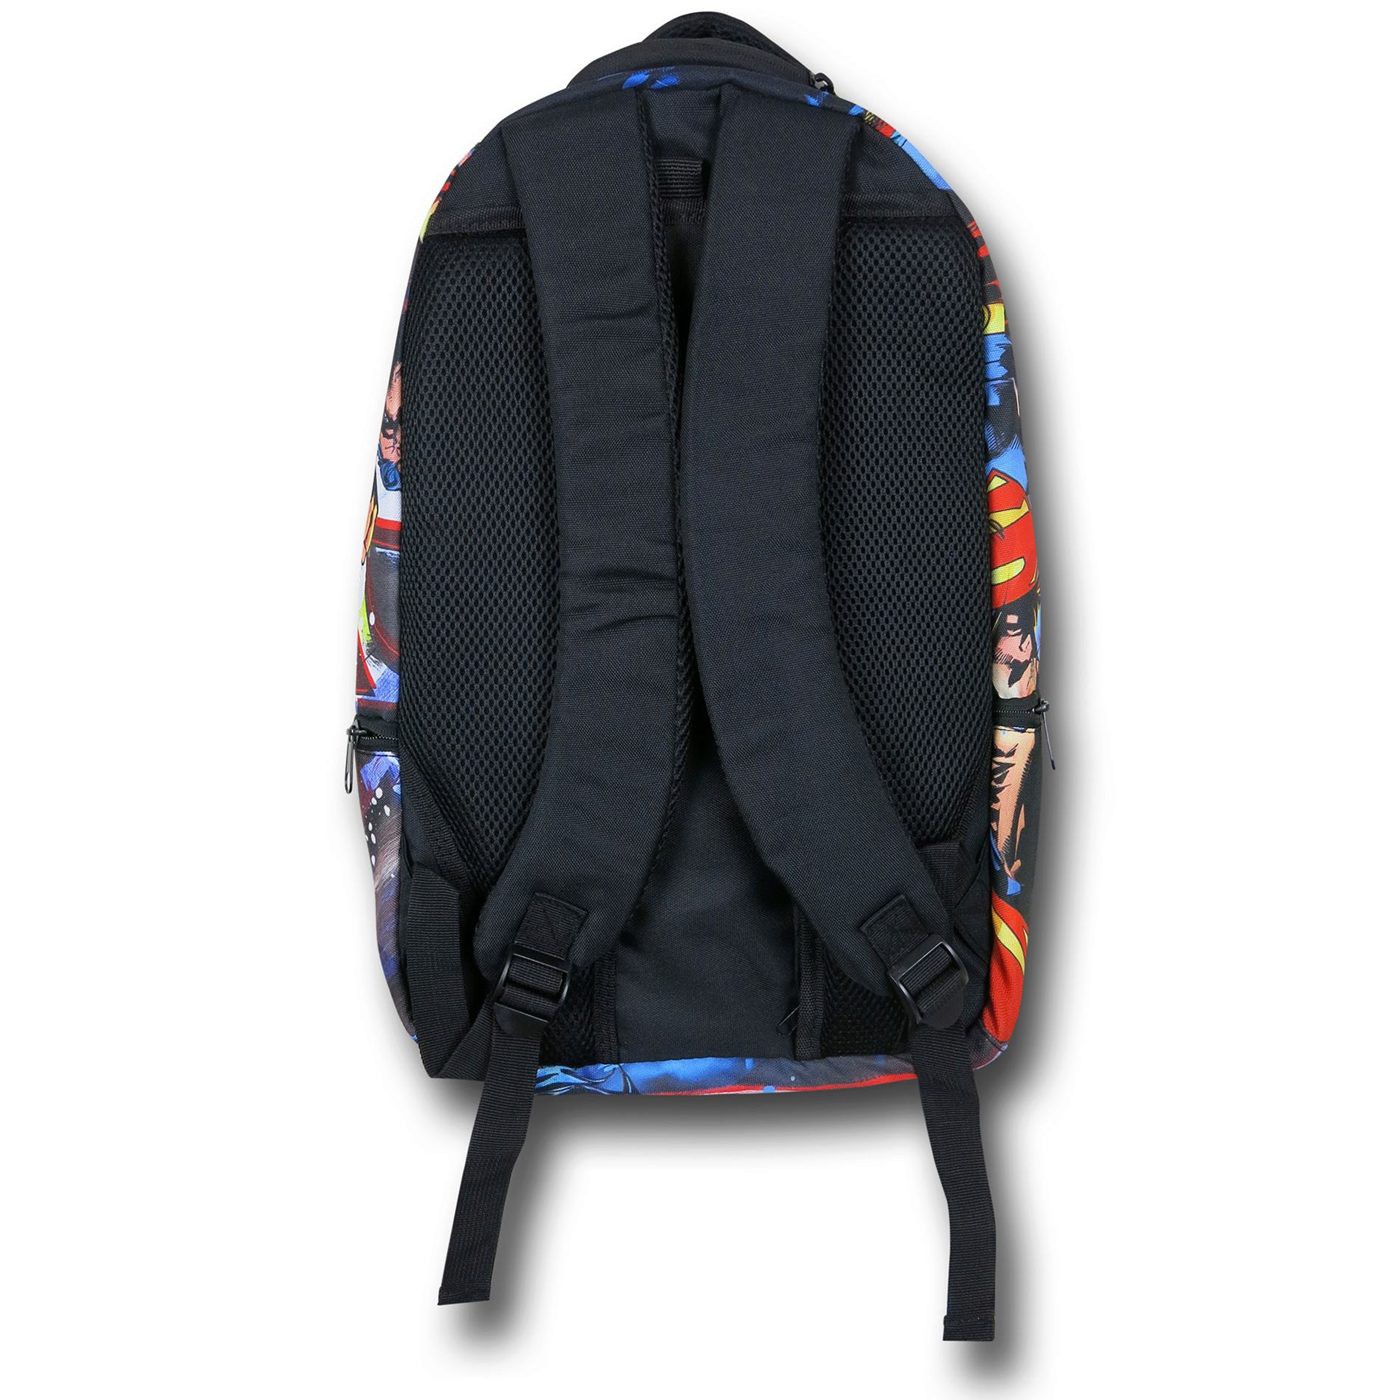 Superman Sublimated Backpack